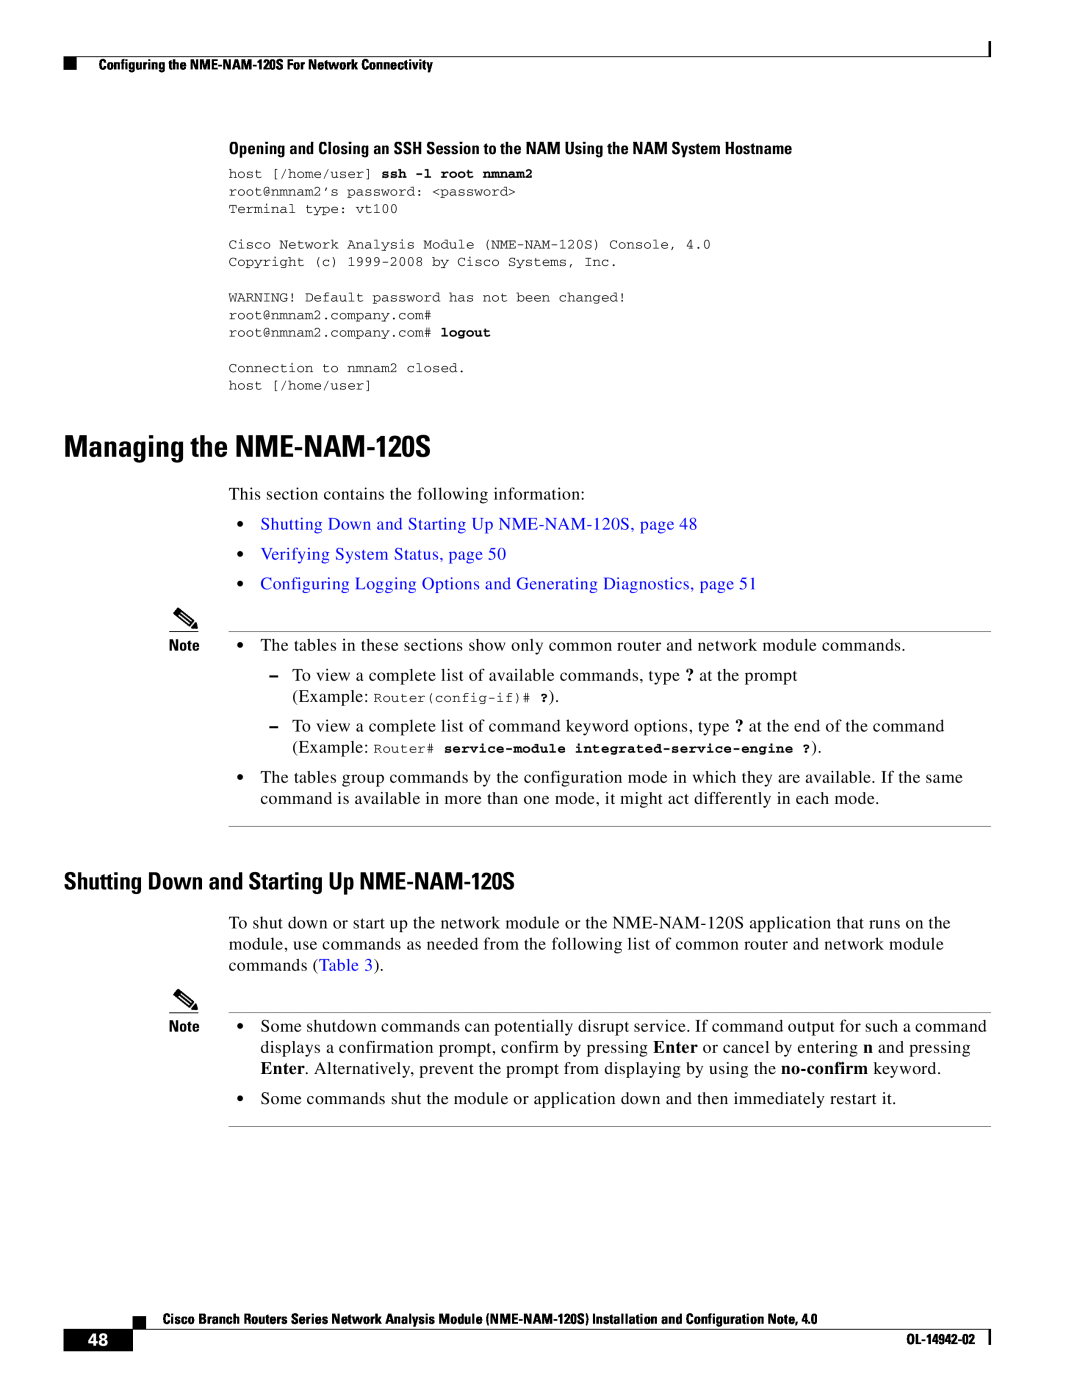 Cisco Systems SMNMADPTR manual Managing the NME-NAM-120S, Shutting Down and Starting Up NME-NAM-120S 